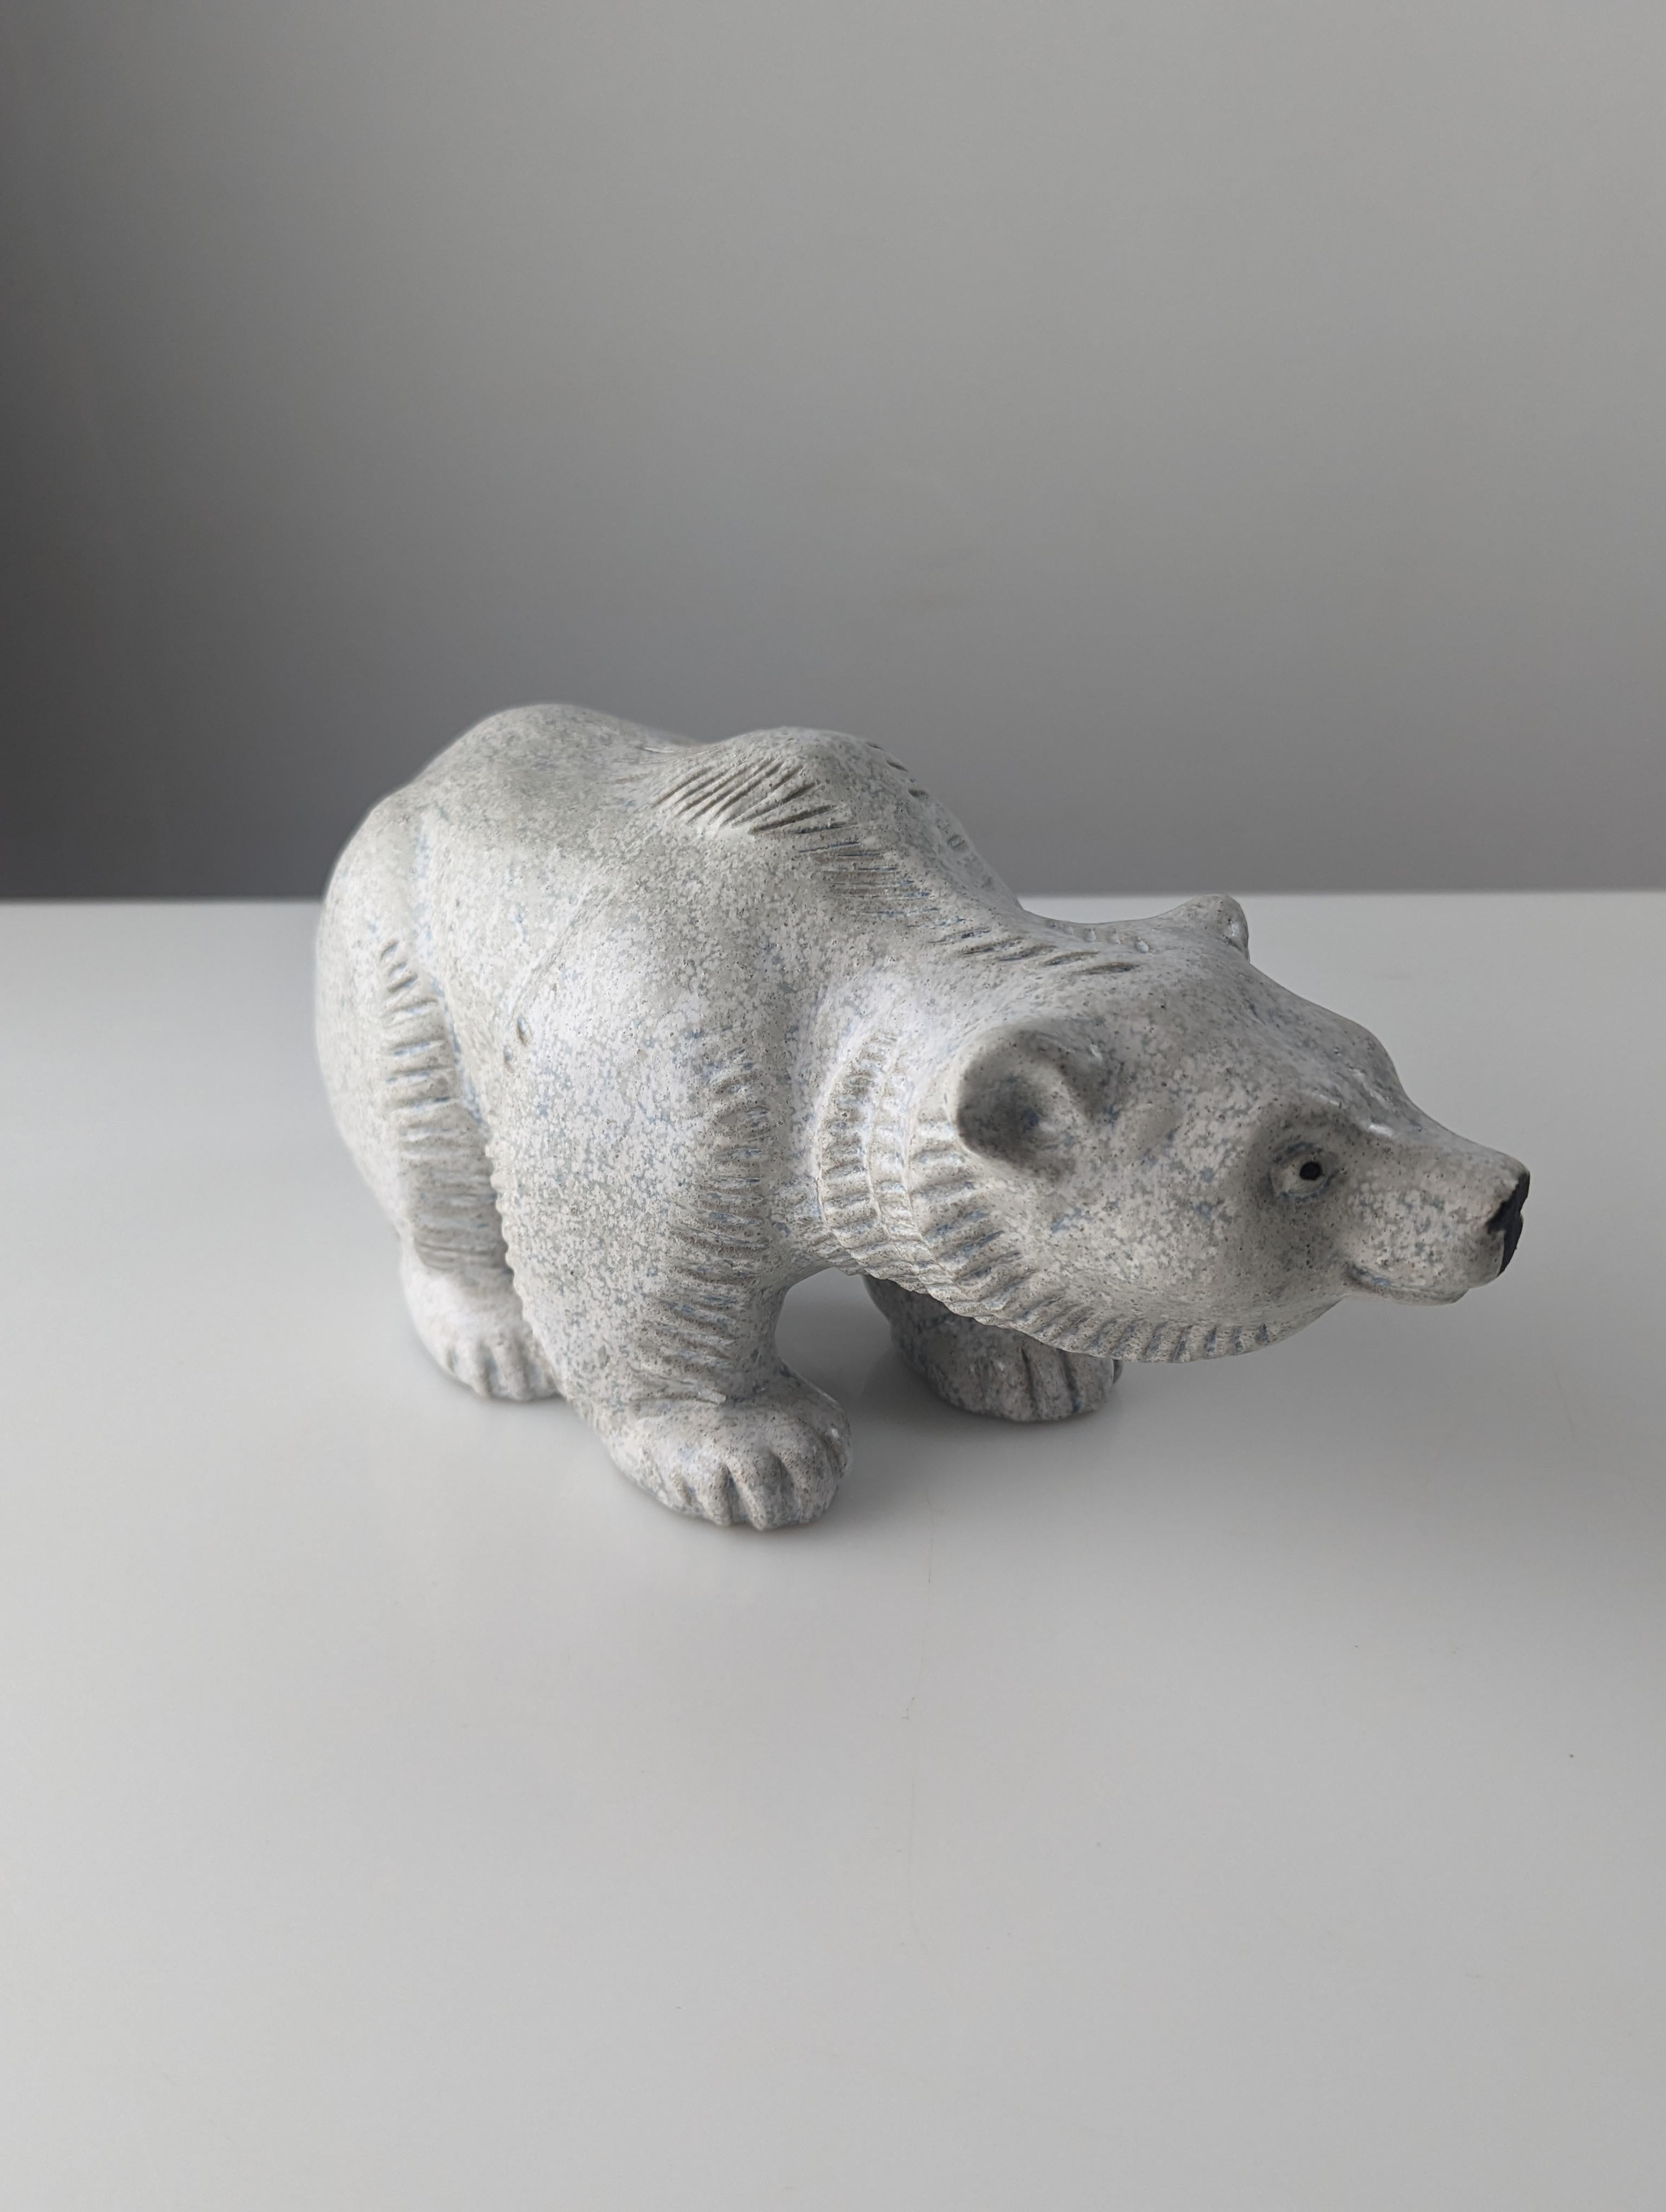 Fantastic Polar Bear made of stoneware designed by Oscar Hartung for Ego Stengods in the 70s.